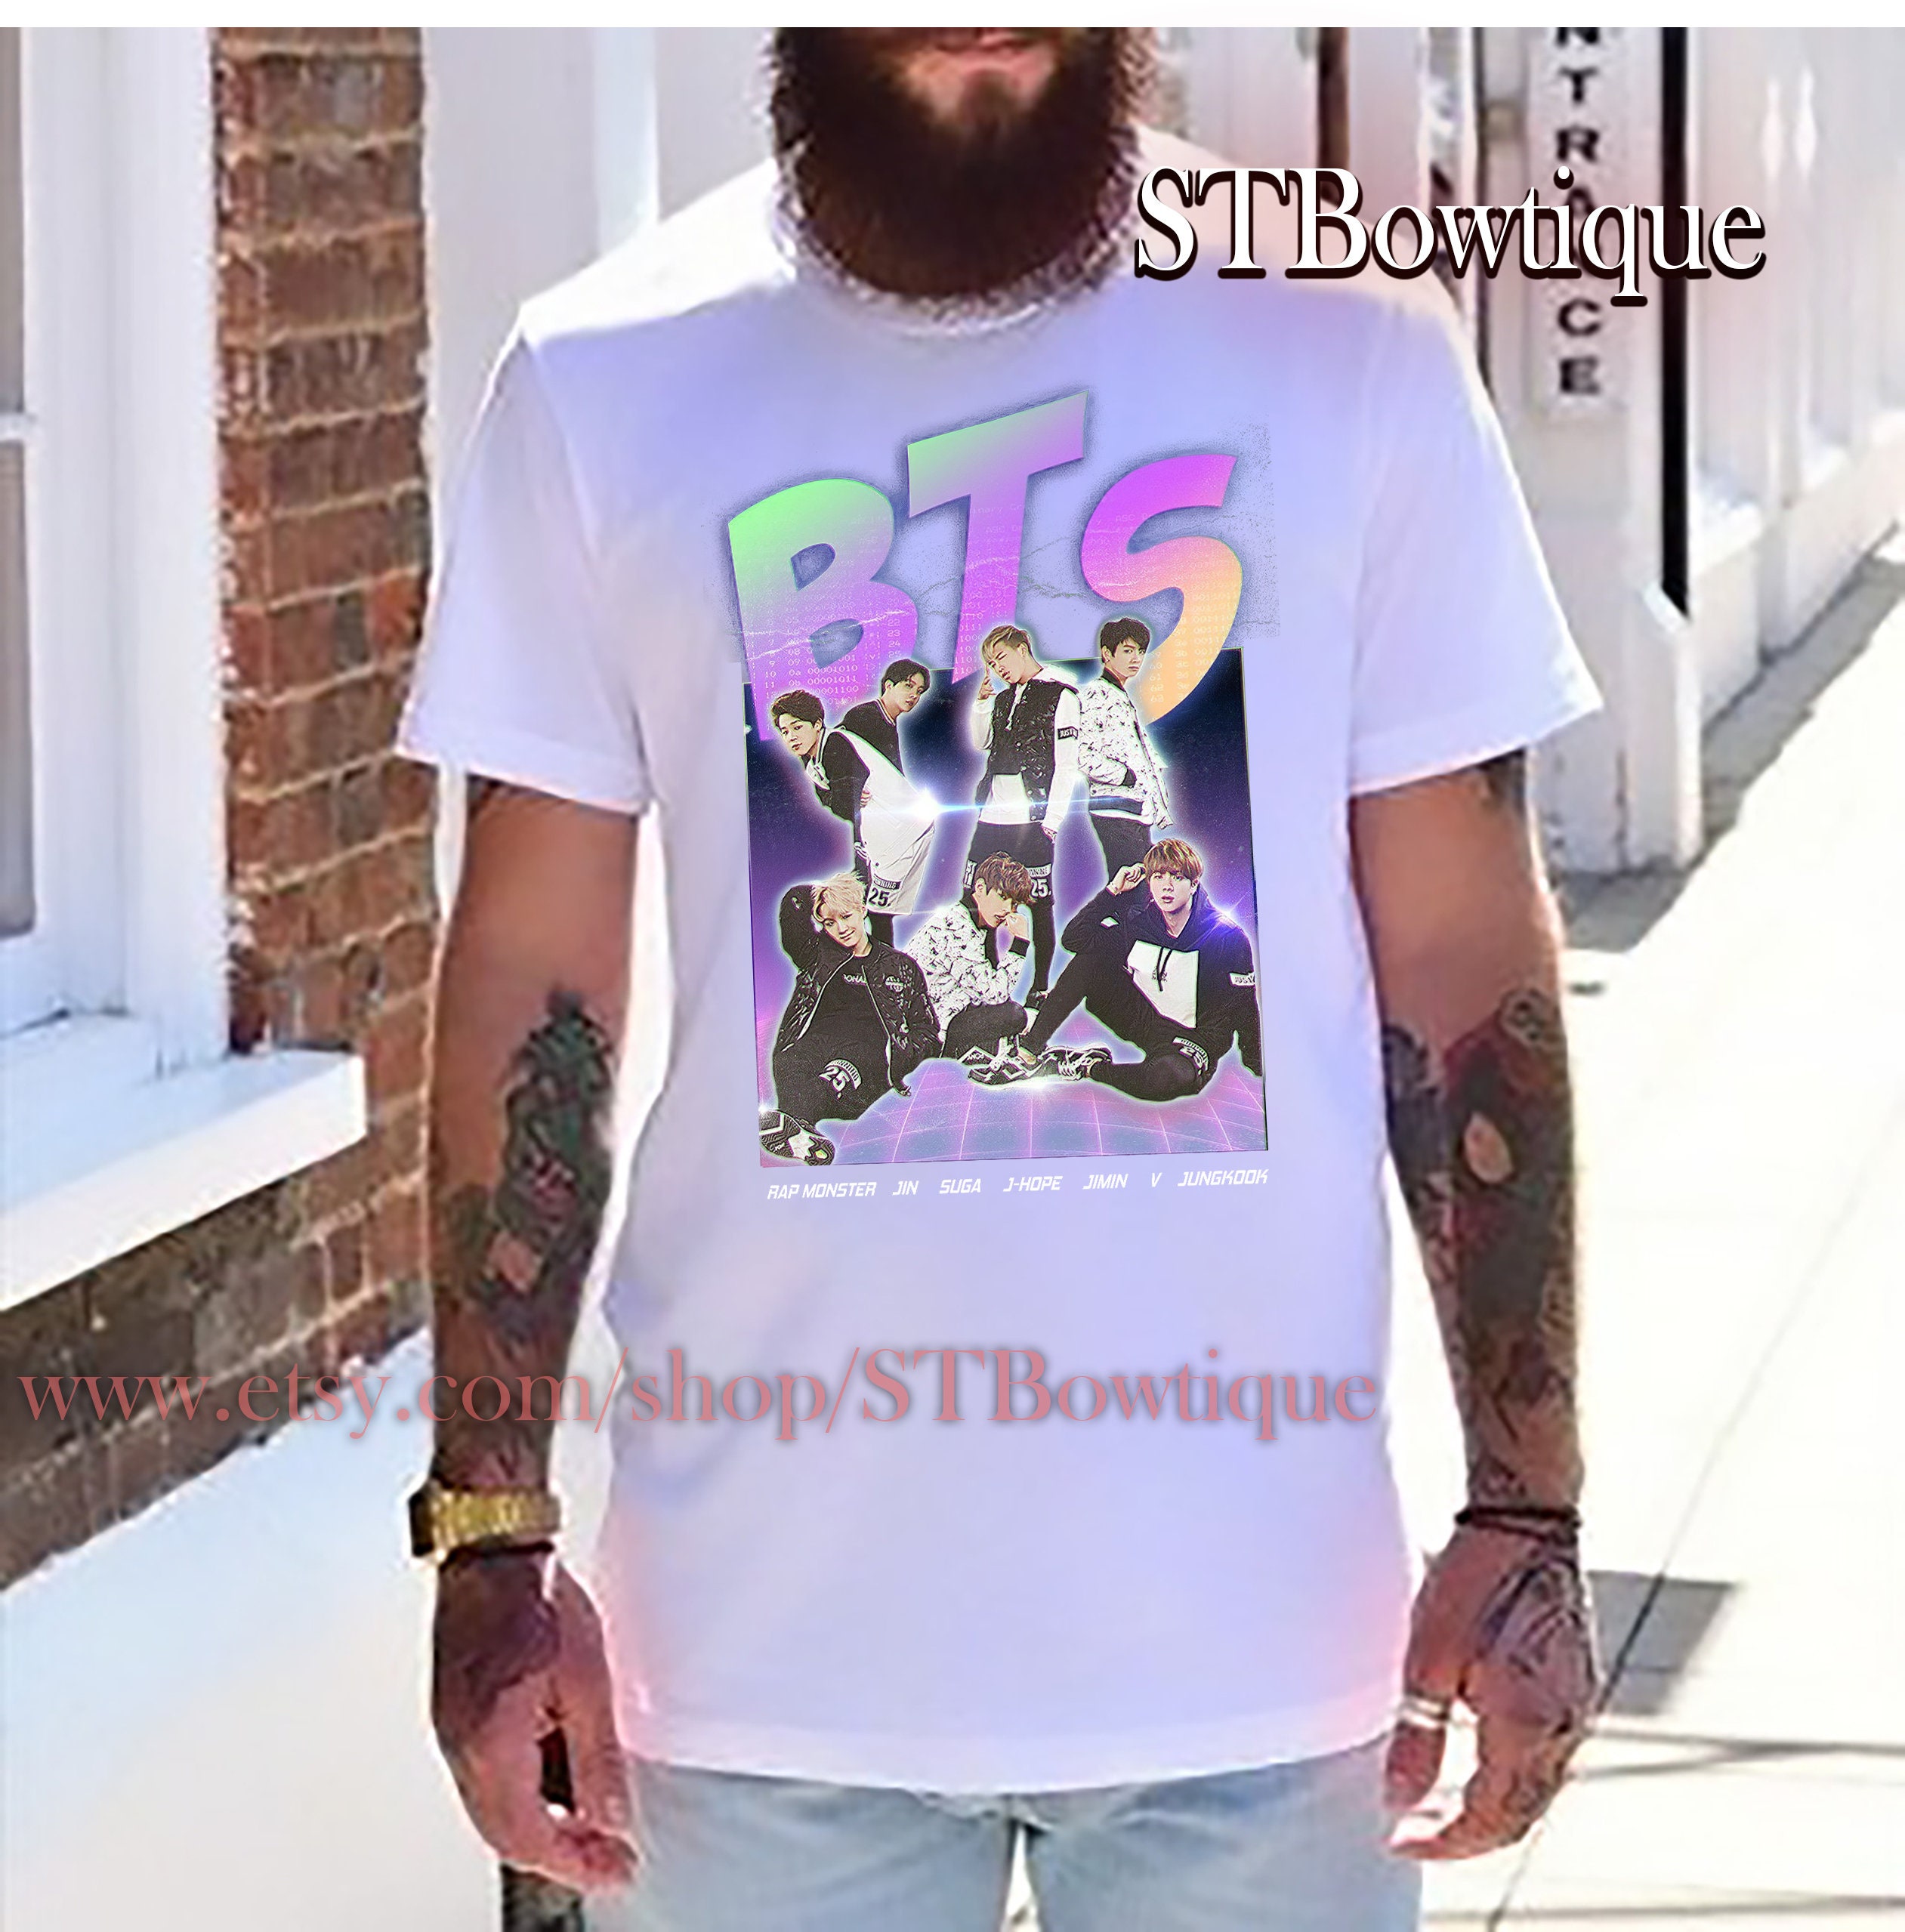 Group Bts Kpop Idols Sign For Army Jungkook Rap Monster Taehyung Unisex T-Shirt